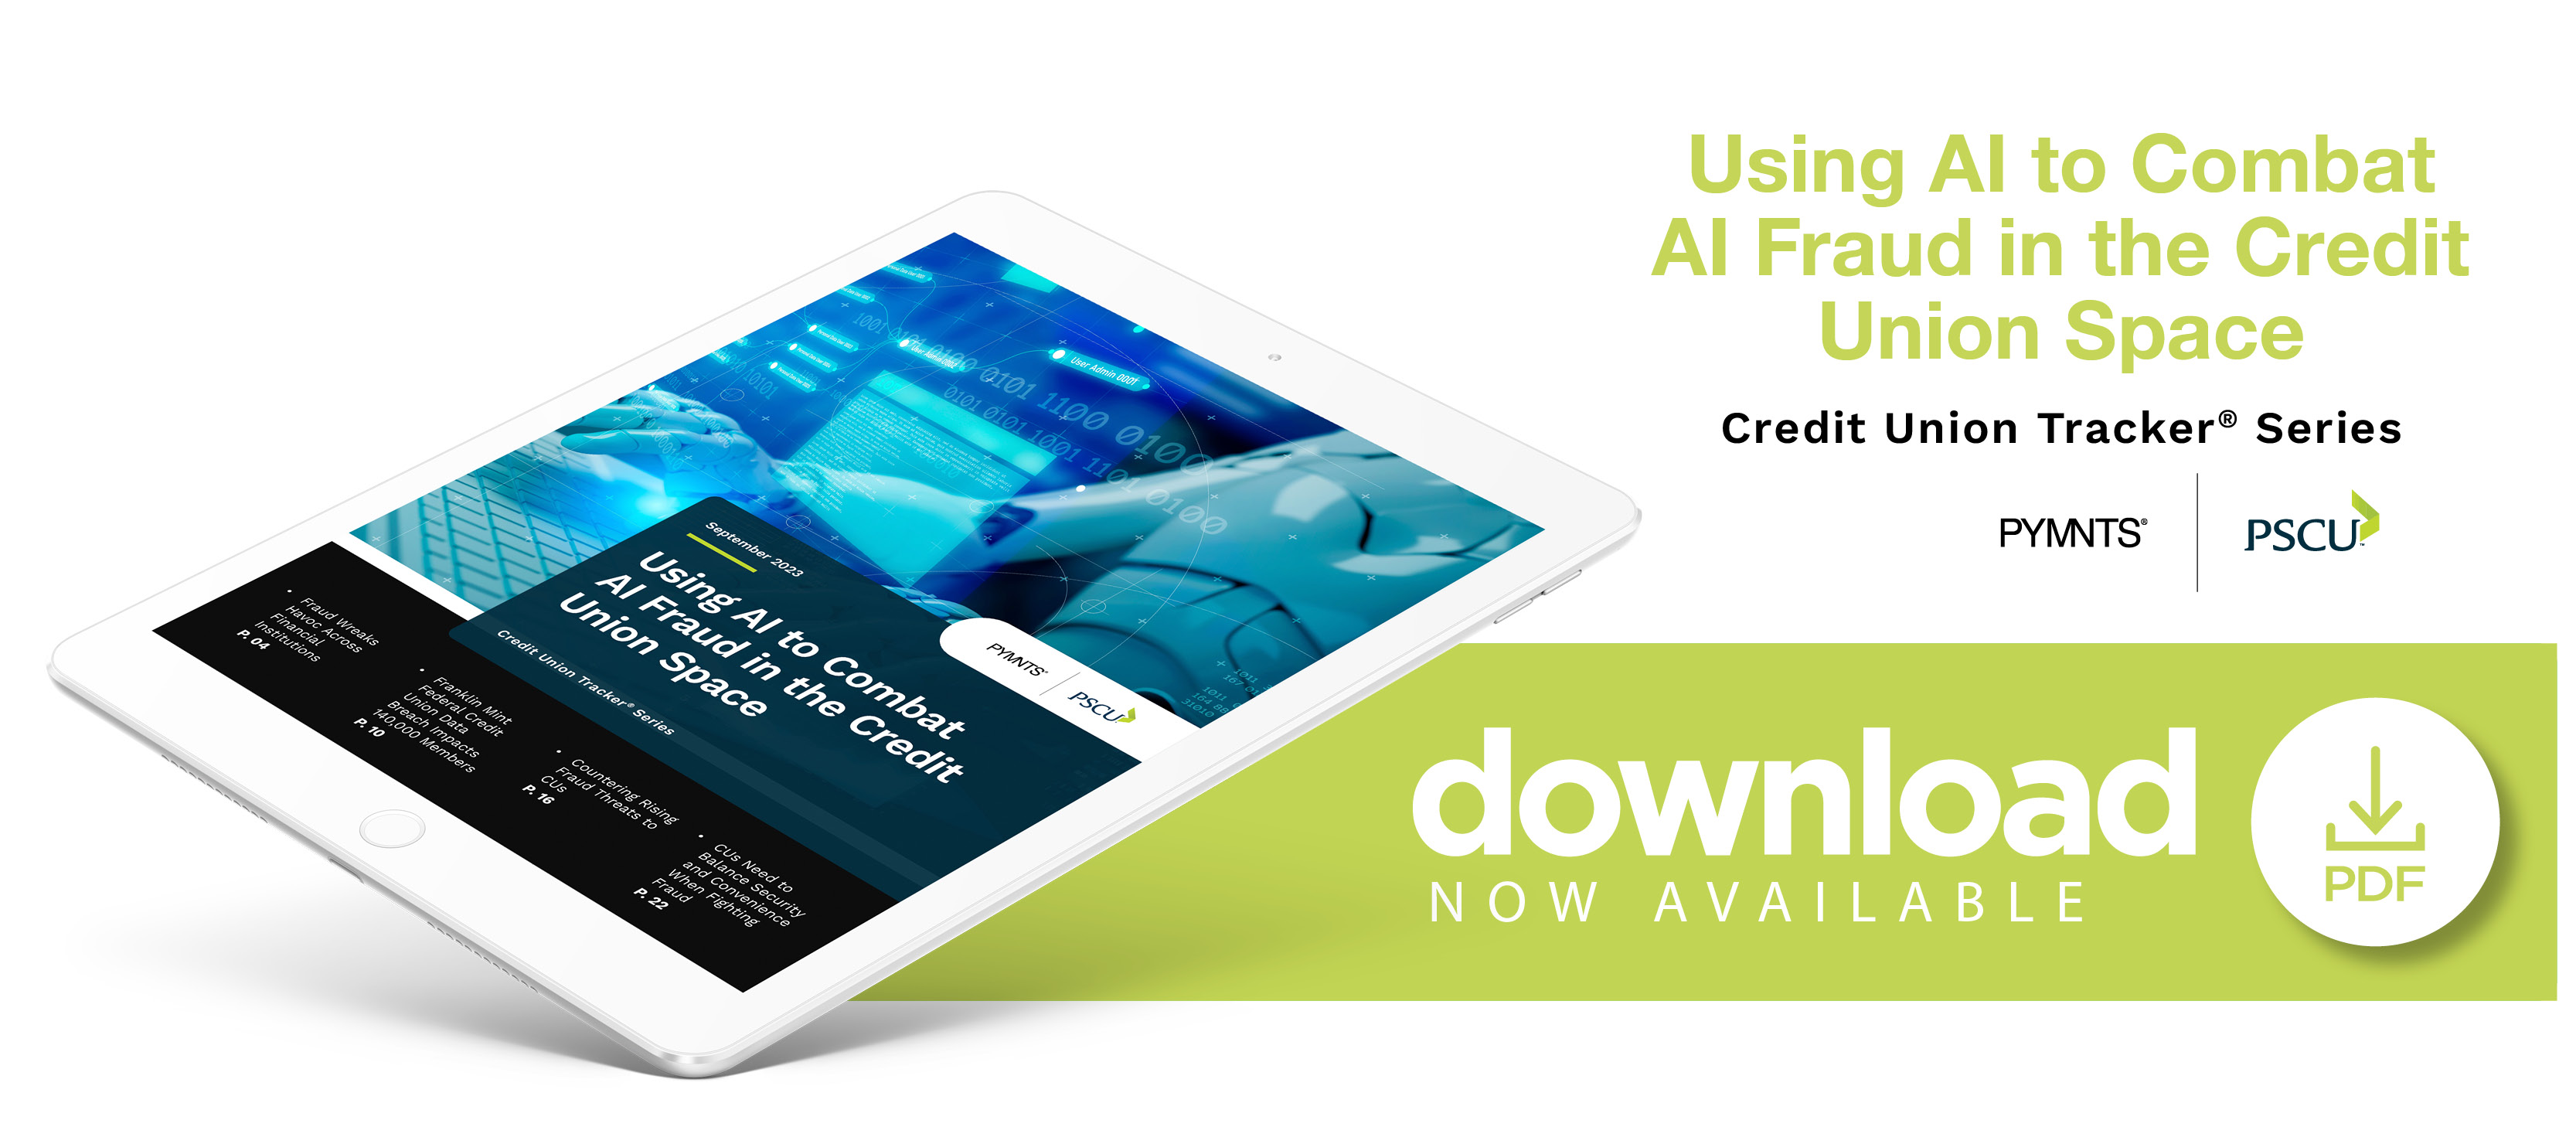 Credit unions fight fraud more than ever as digital banking becomes more popular. Fraud prevention strategies using AI can fight fraudsters and protect members.